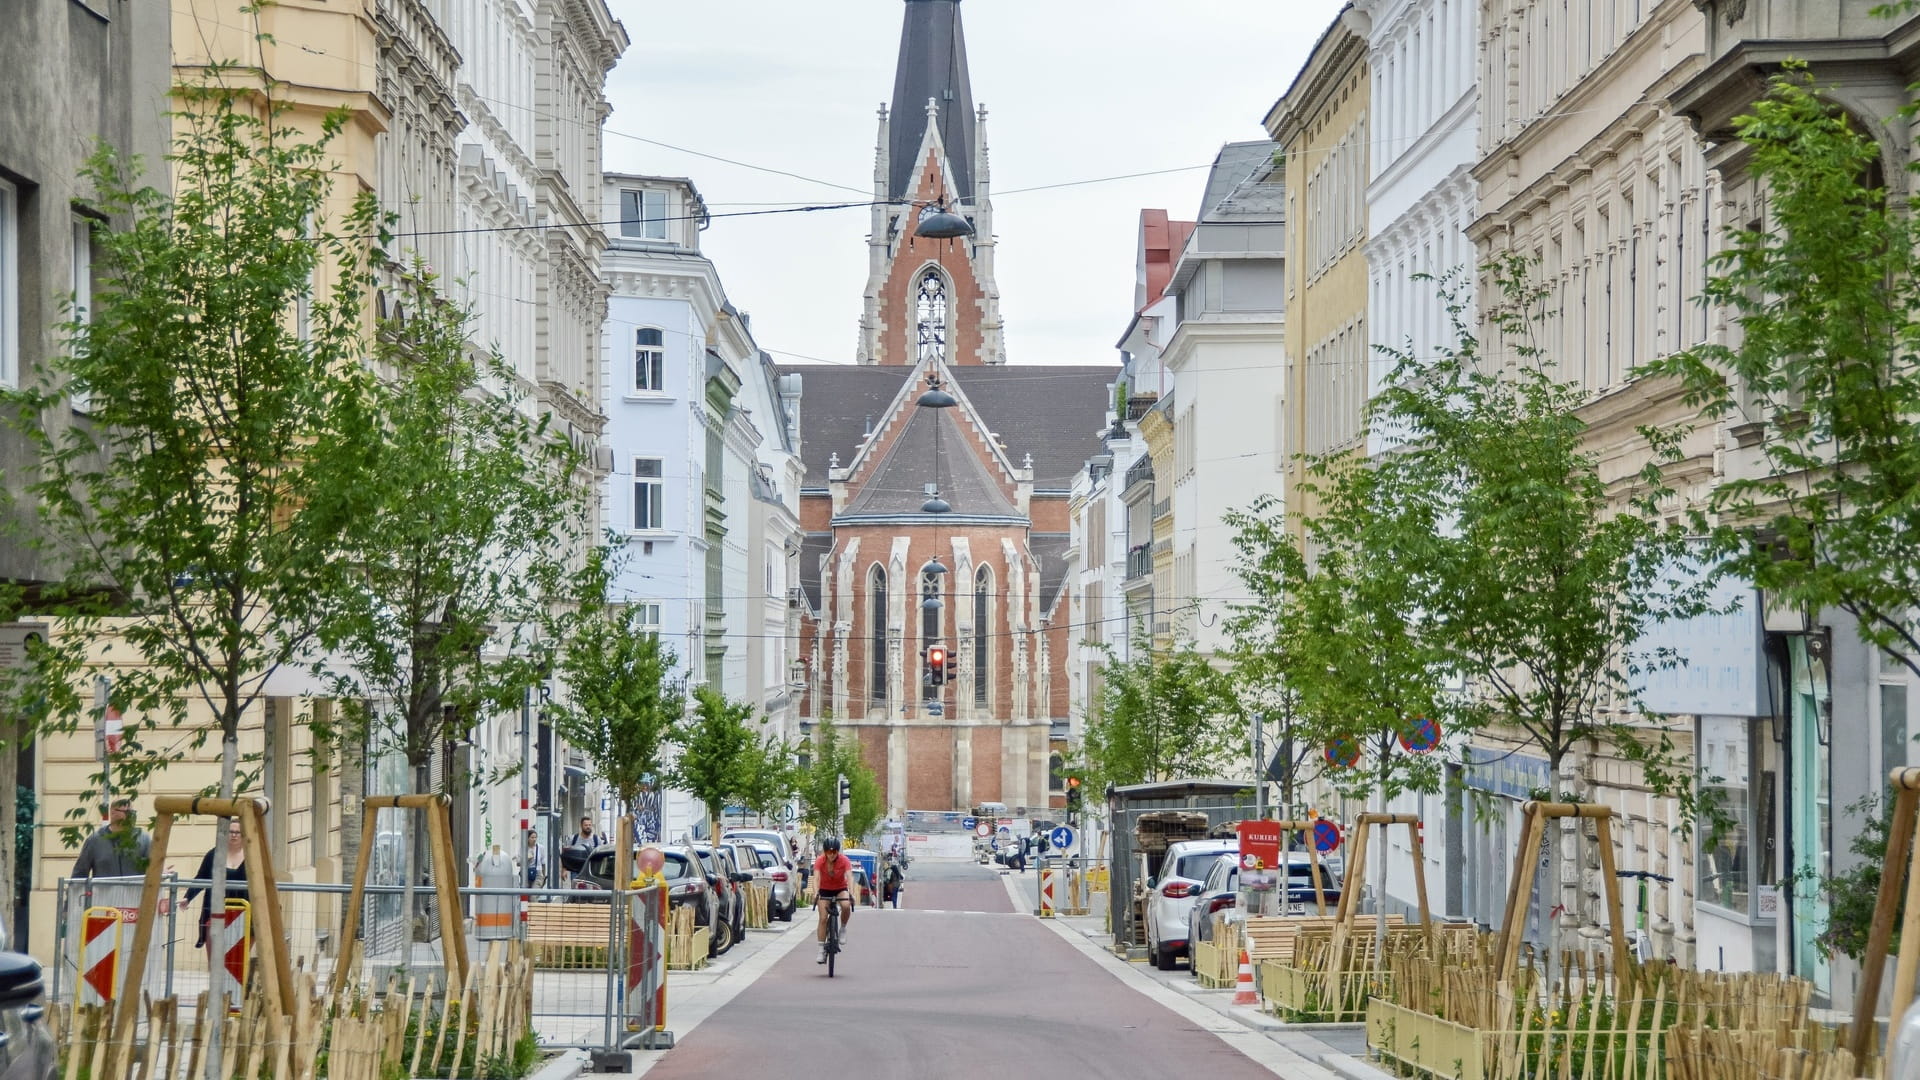 Designing the first Dutch bicycle street in Austria